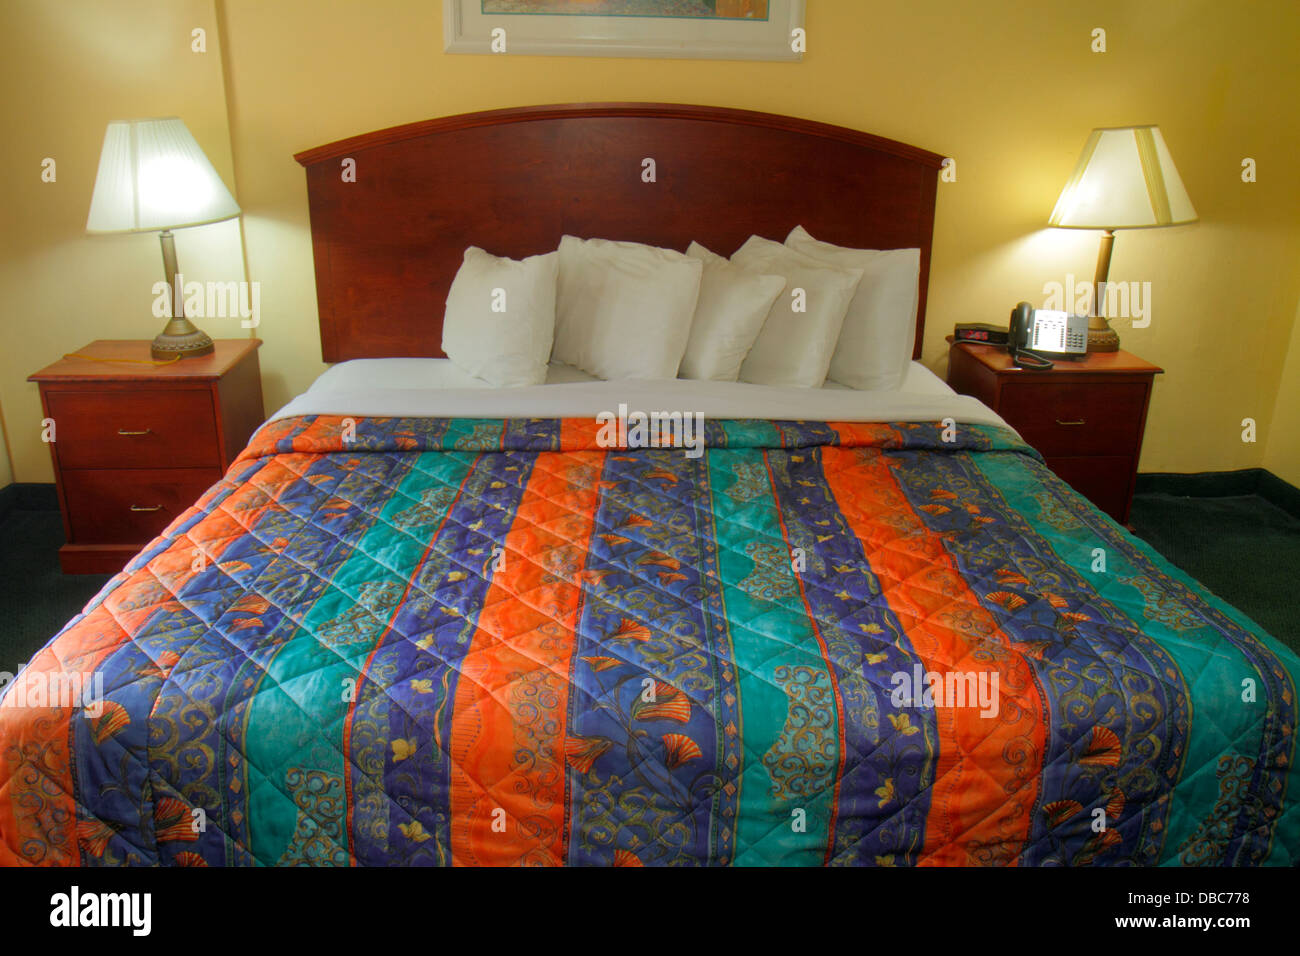 Fort Ft. Lauderdale Florida,Days Inn Bahia Cabana,motel,hotel,guest room,budget,interior inside,king size bed,made,furniture,bedspread,pillows,looking Stock Photo